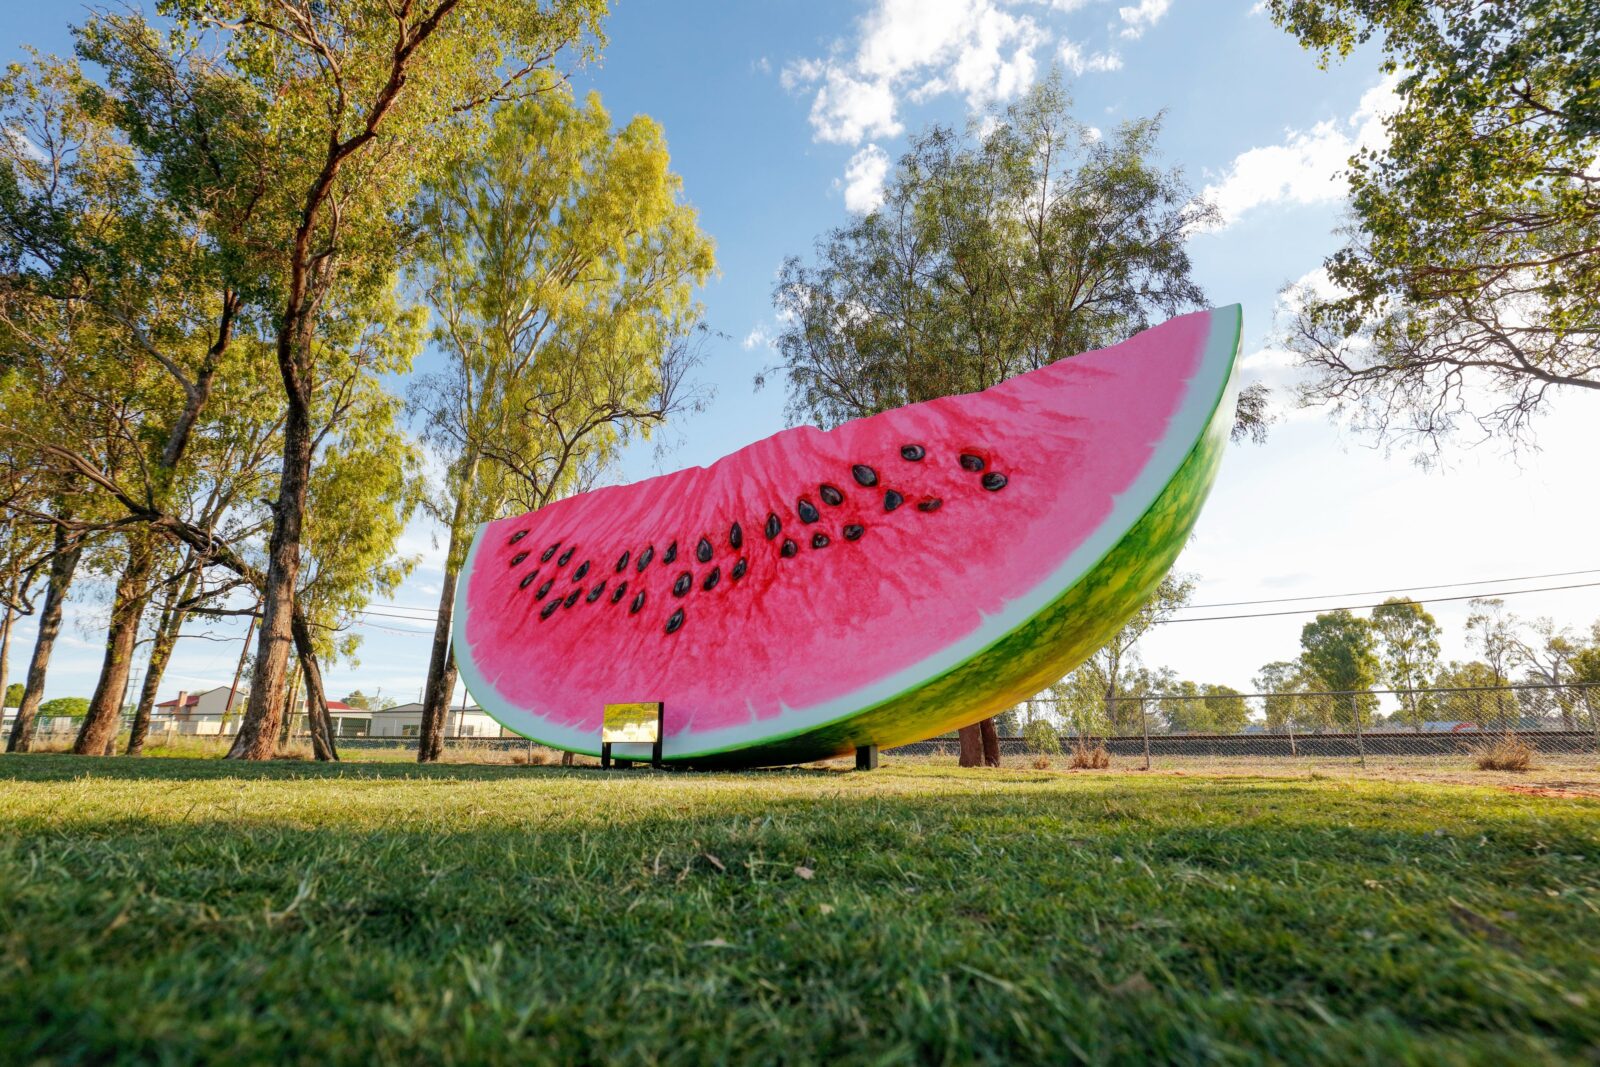 Winner of the "Next Big Thing" Chinchilla boasts a Watermelon sculpture near the VIC. Be sure to t